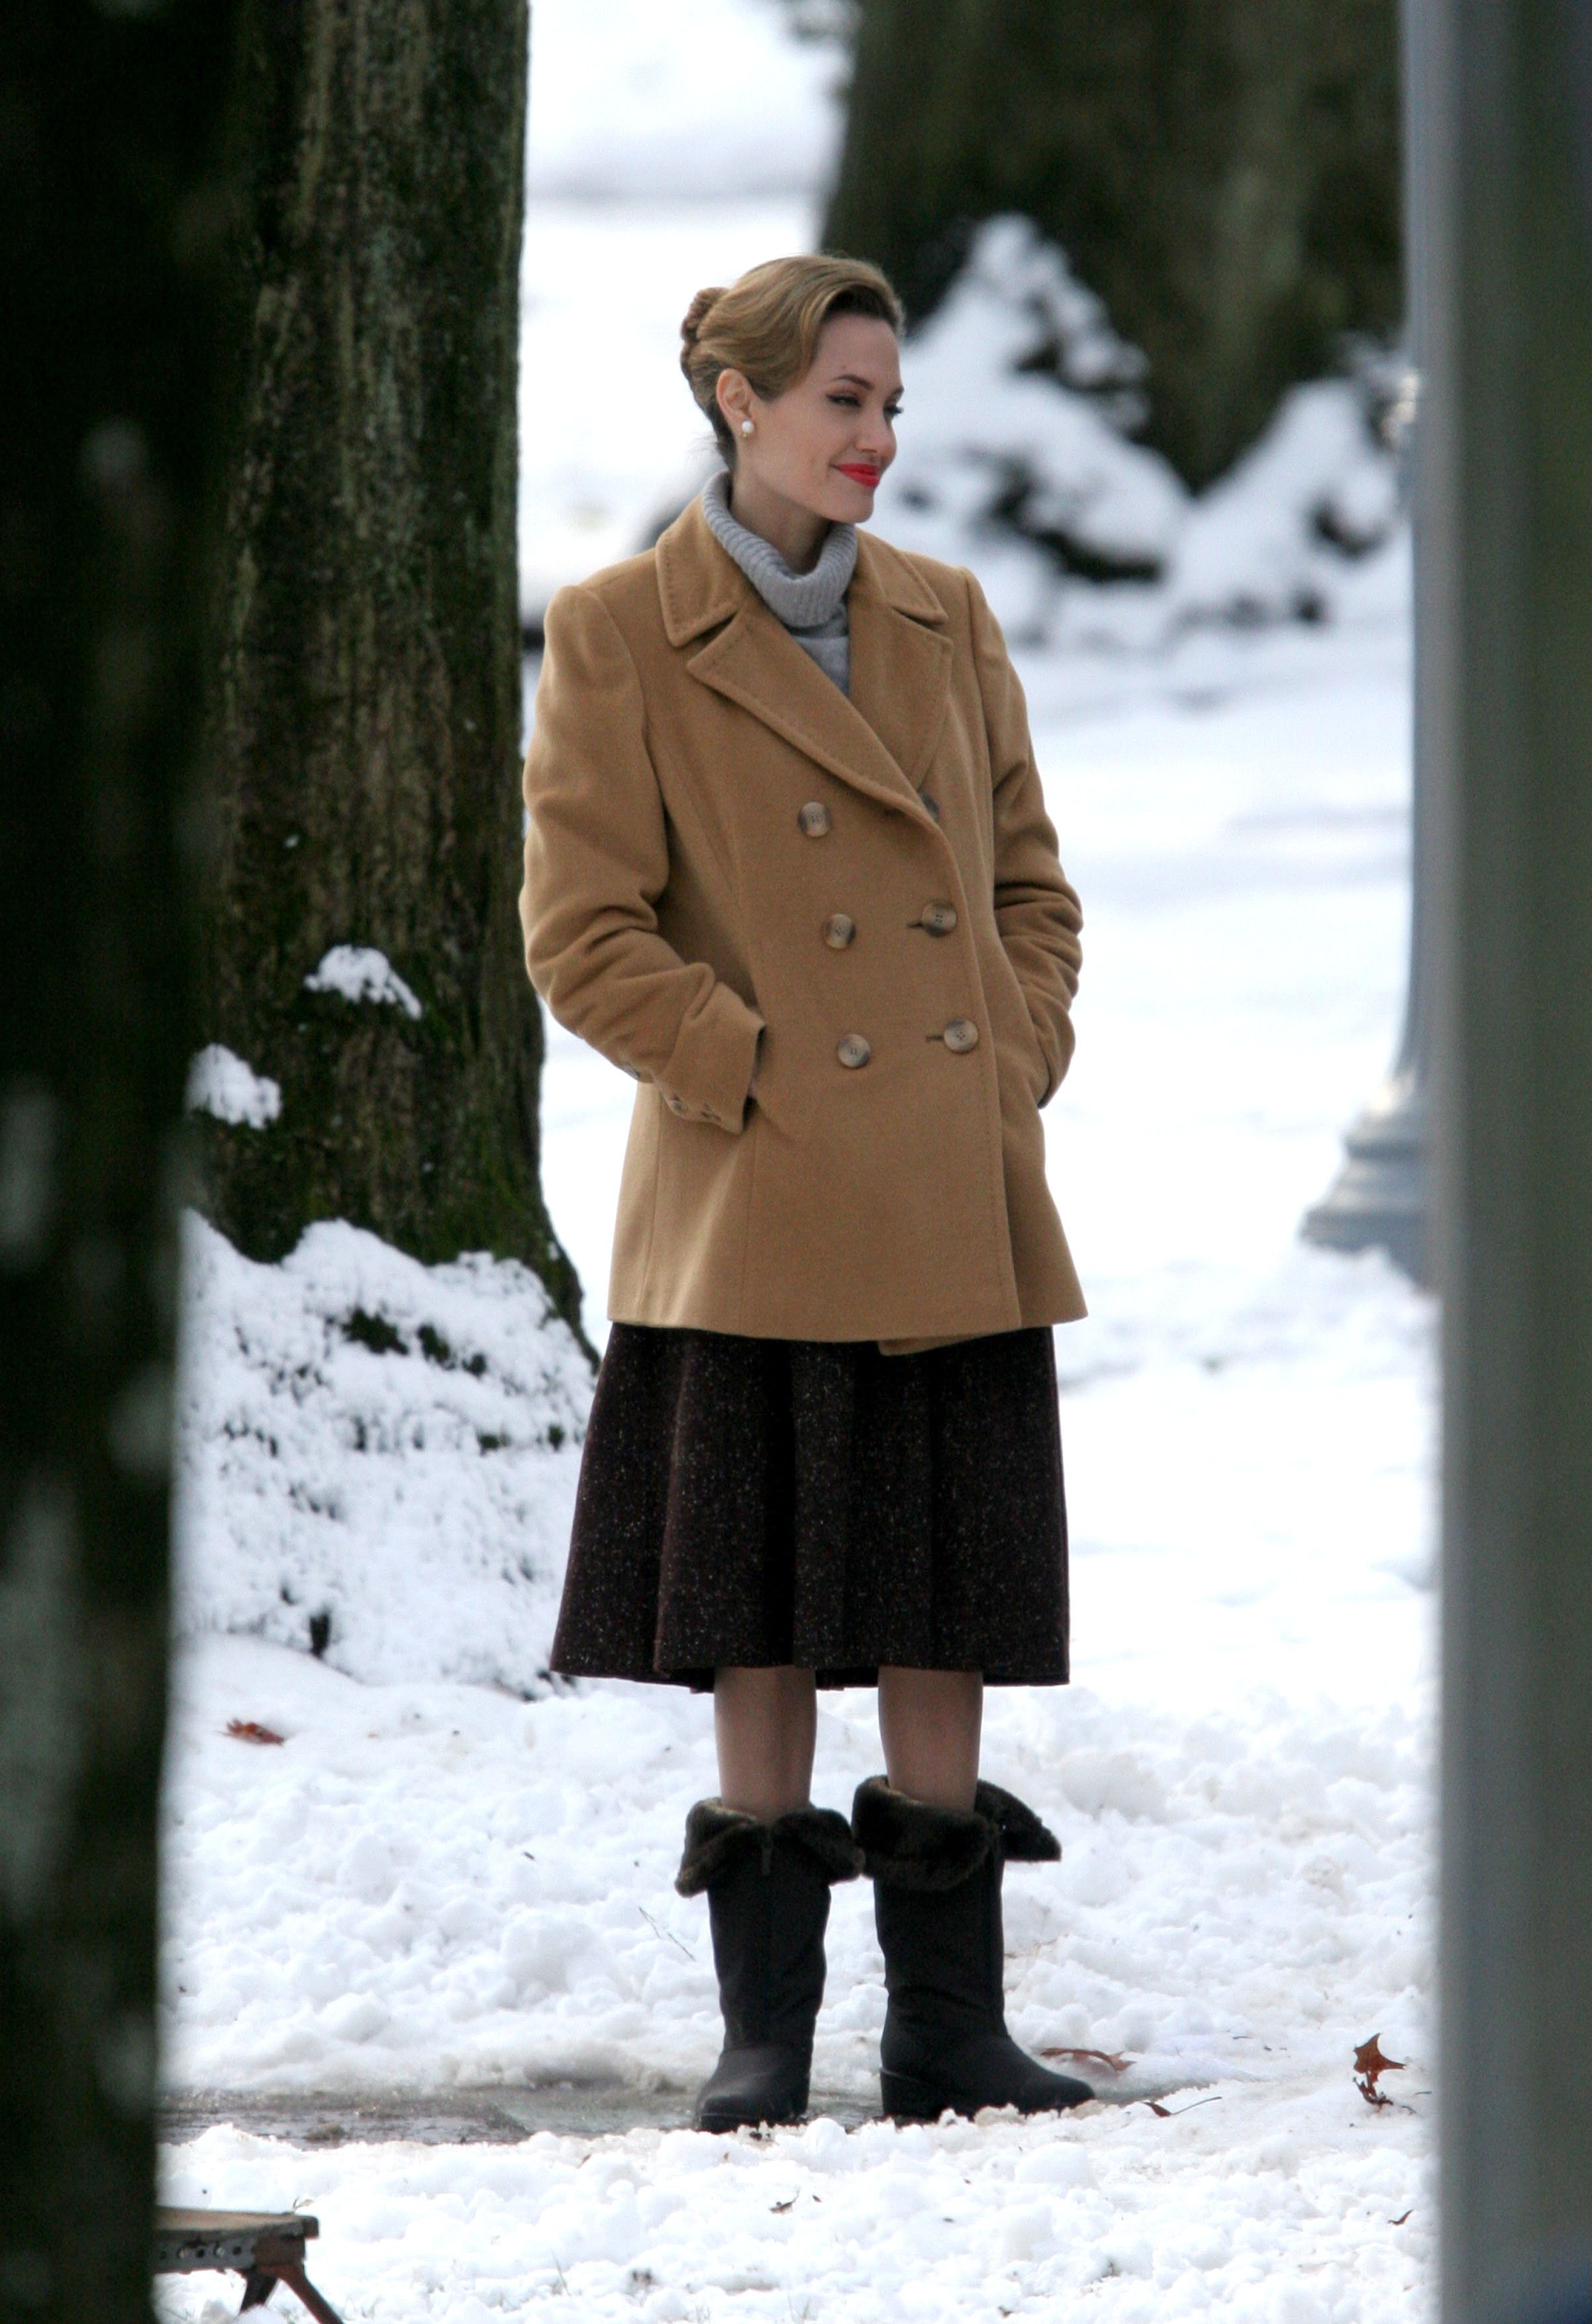 Angelina Jolie on location for "The Good Shepherd" on December 6, 2005, in Long Island, New York. | Source: Getty Images